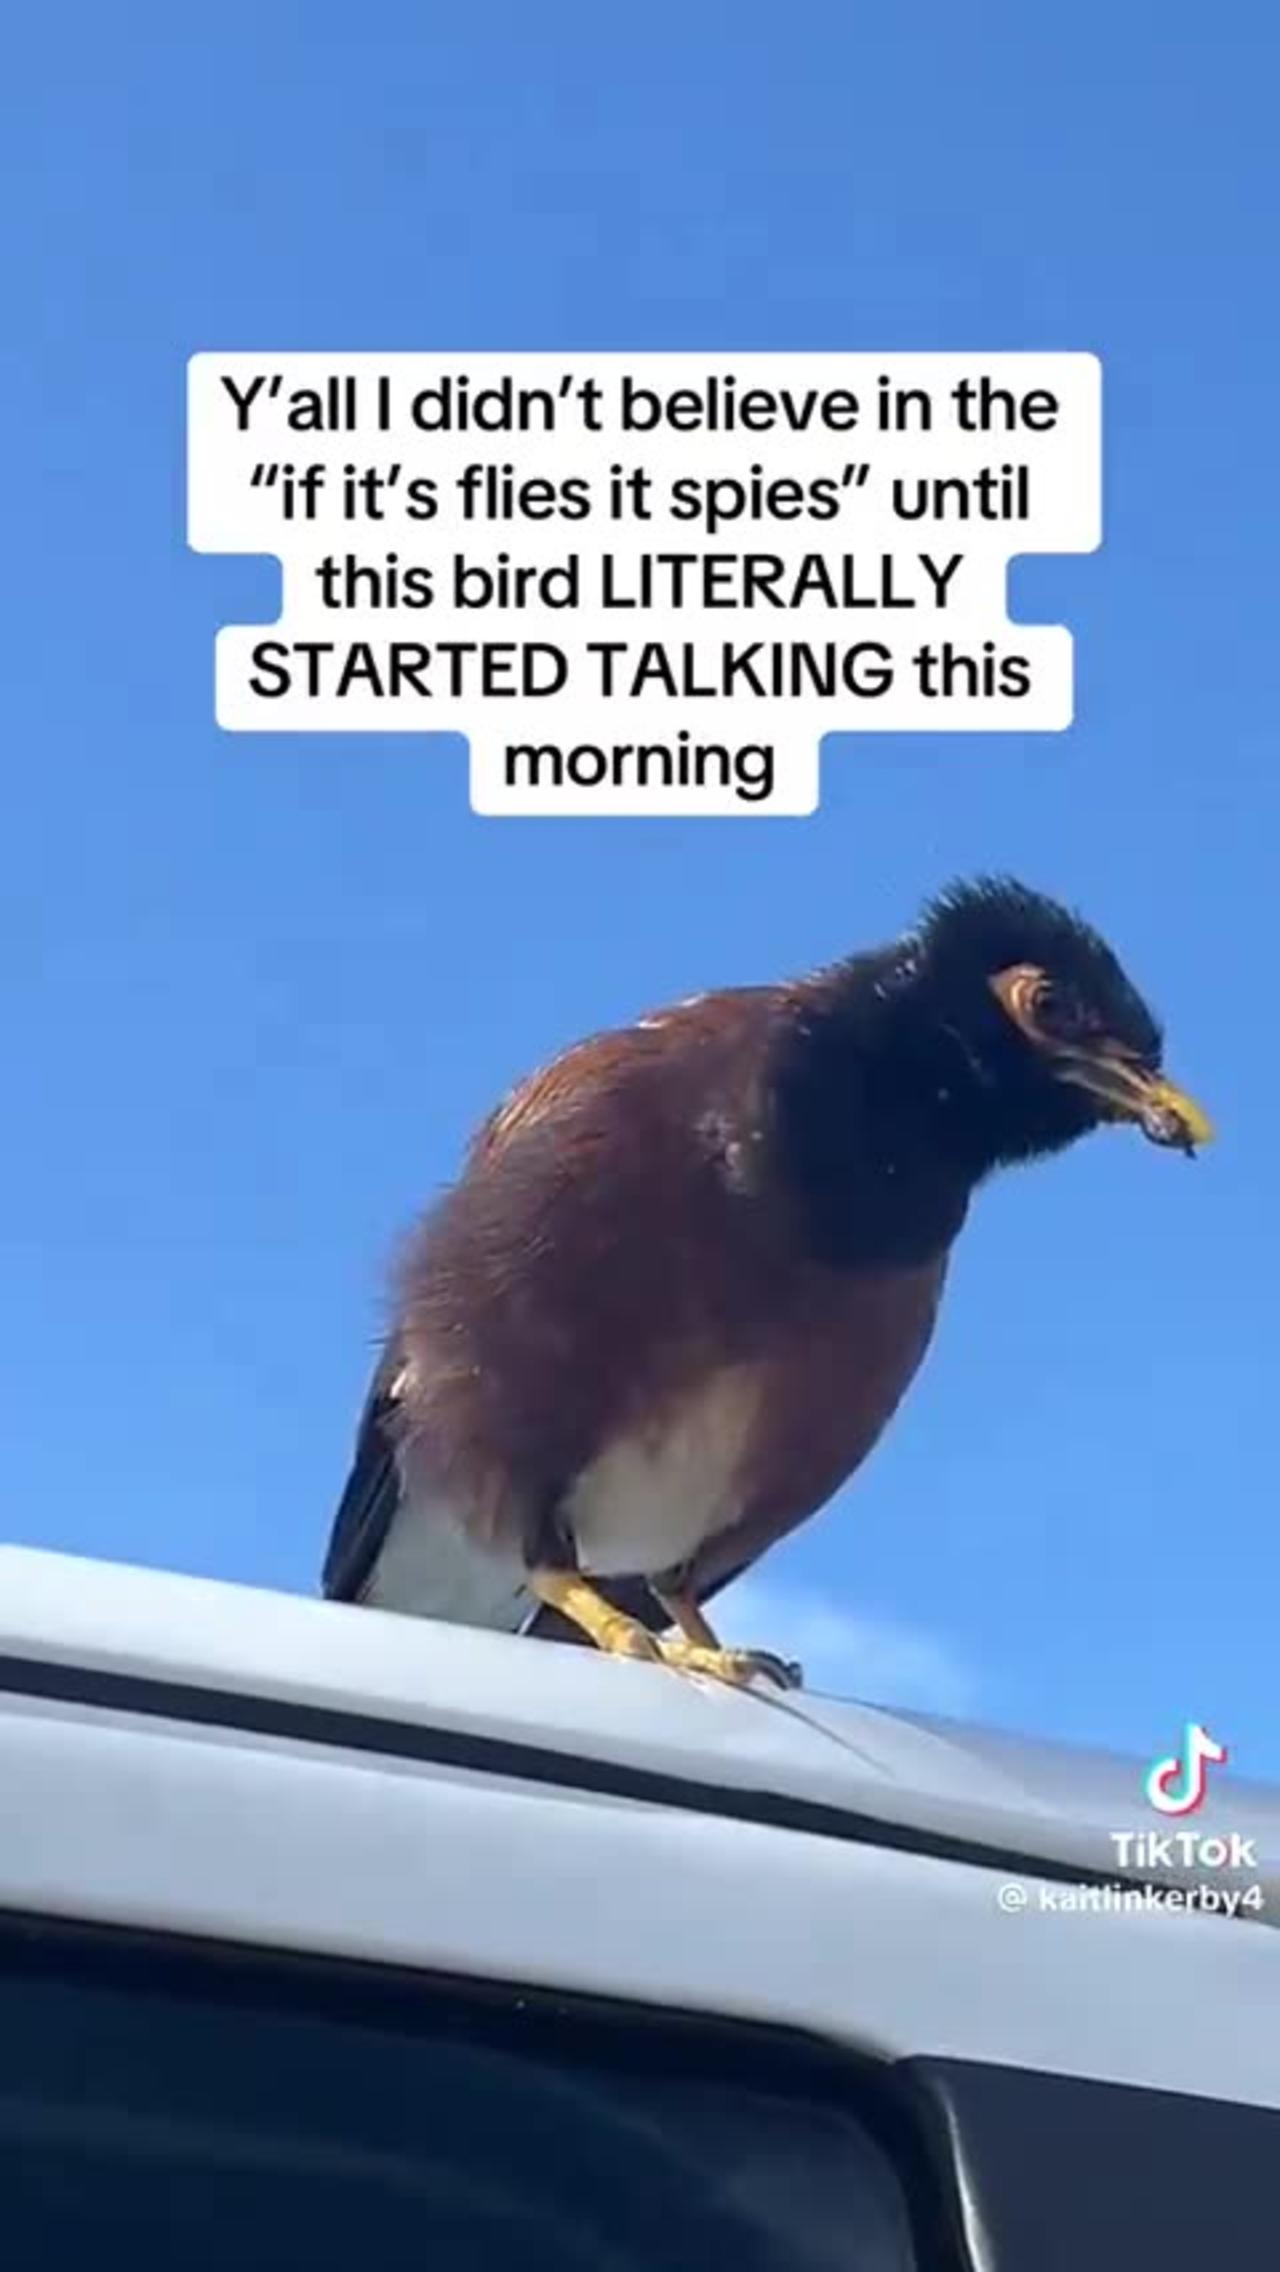 Y'all I didn't believe in the "if it's flies it spies" until this bird LITERALLY STARTED TALKING this m